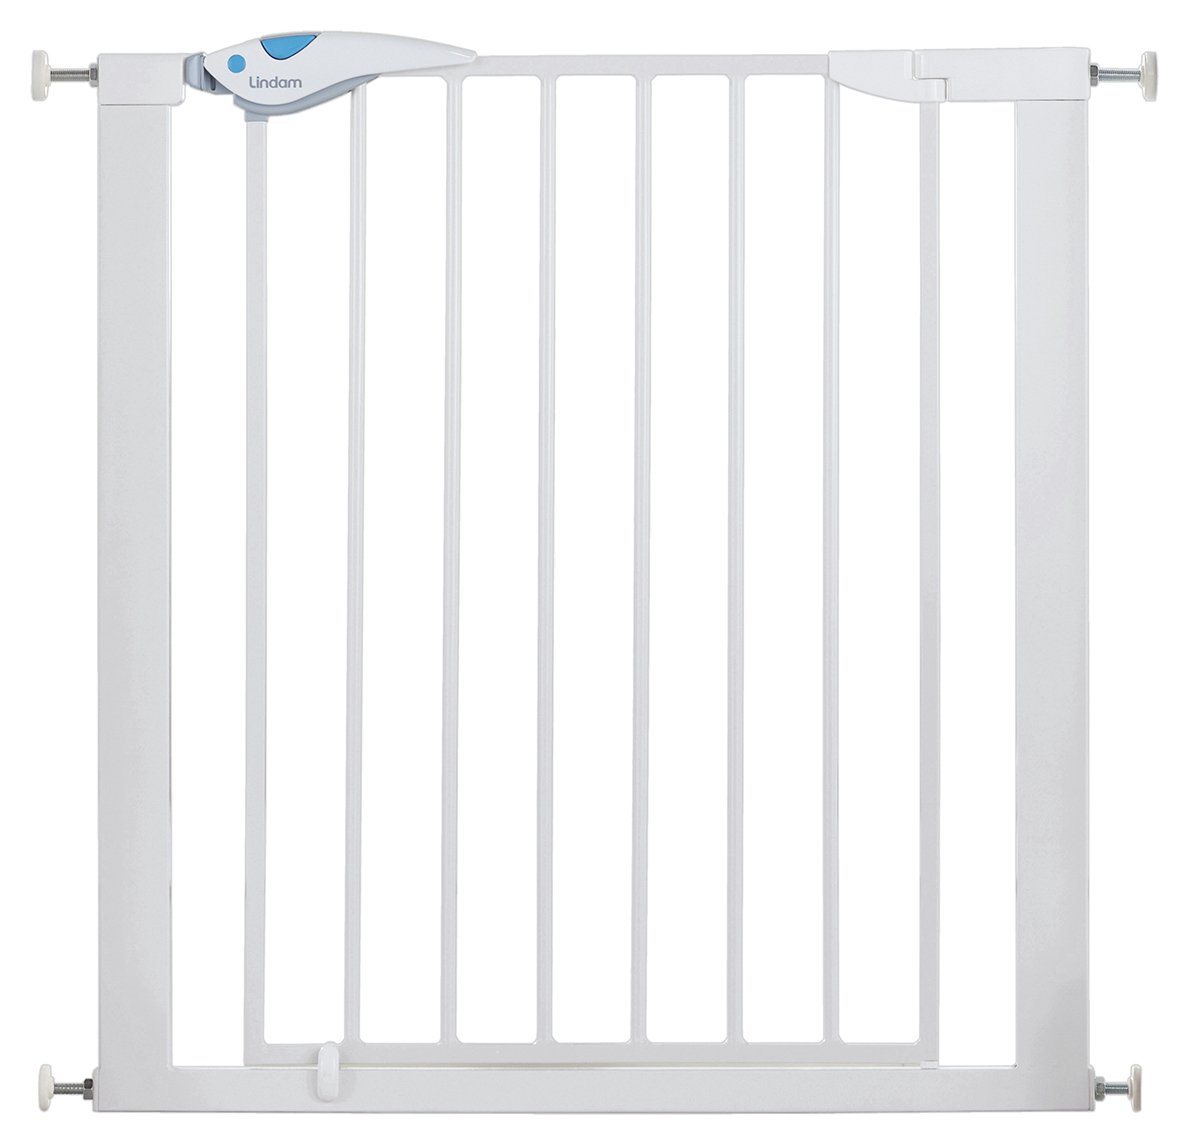 Buy Lindam Easy Fit Deluxe Safety Gate 